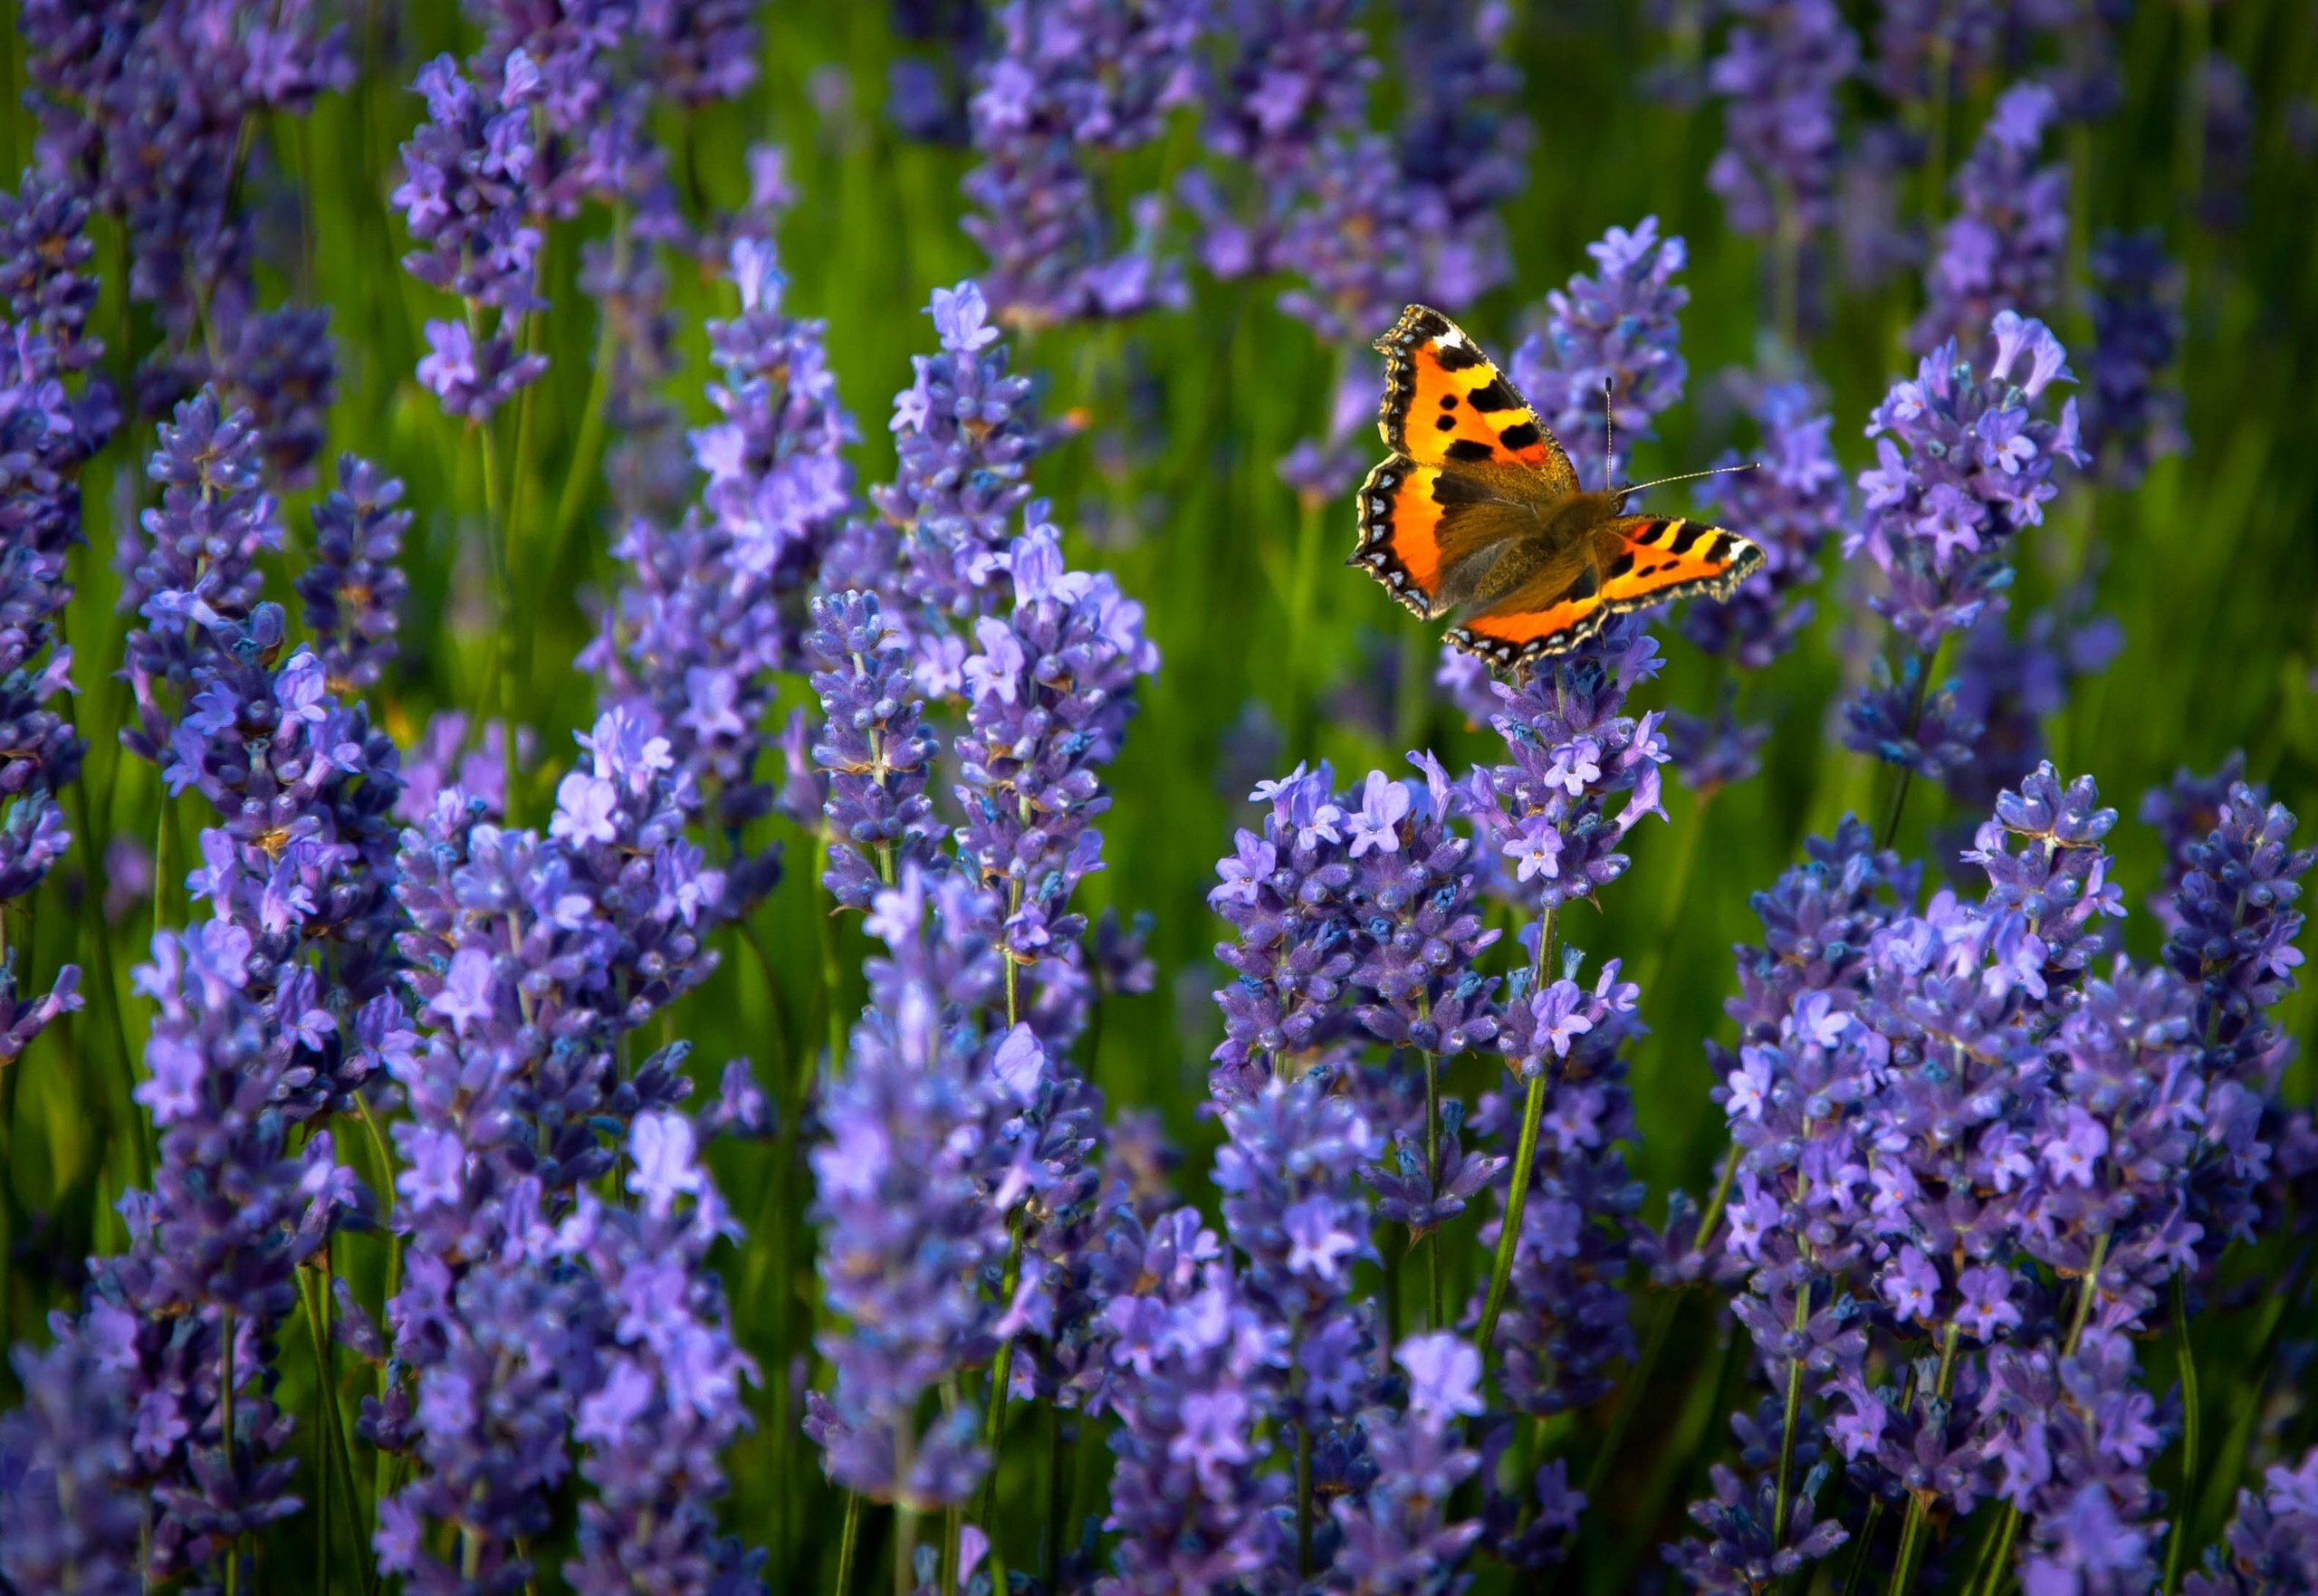 Ordinary, Hives, Lavender, Butterfly Wallpaper HD